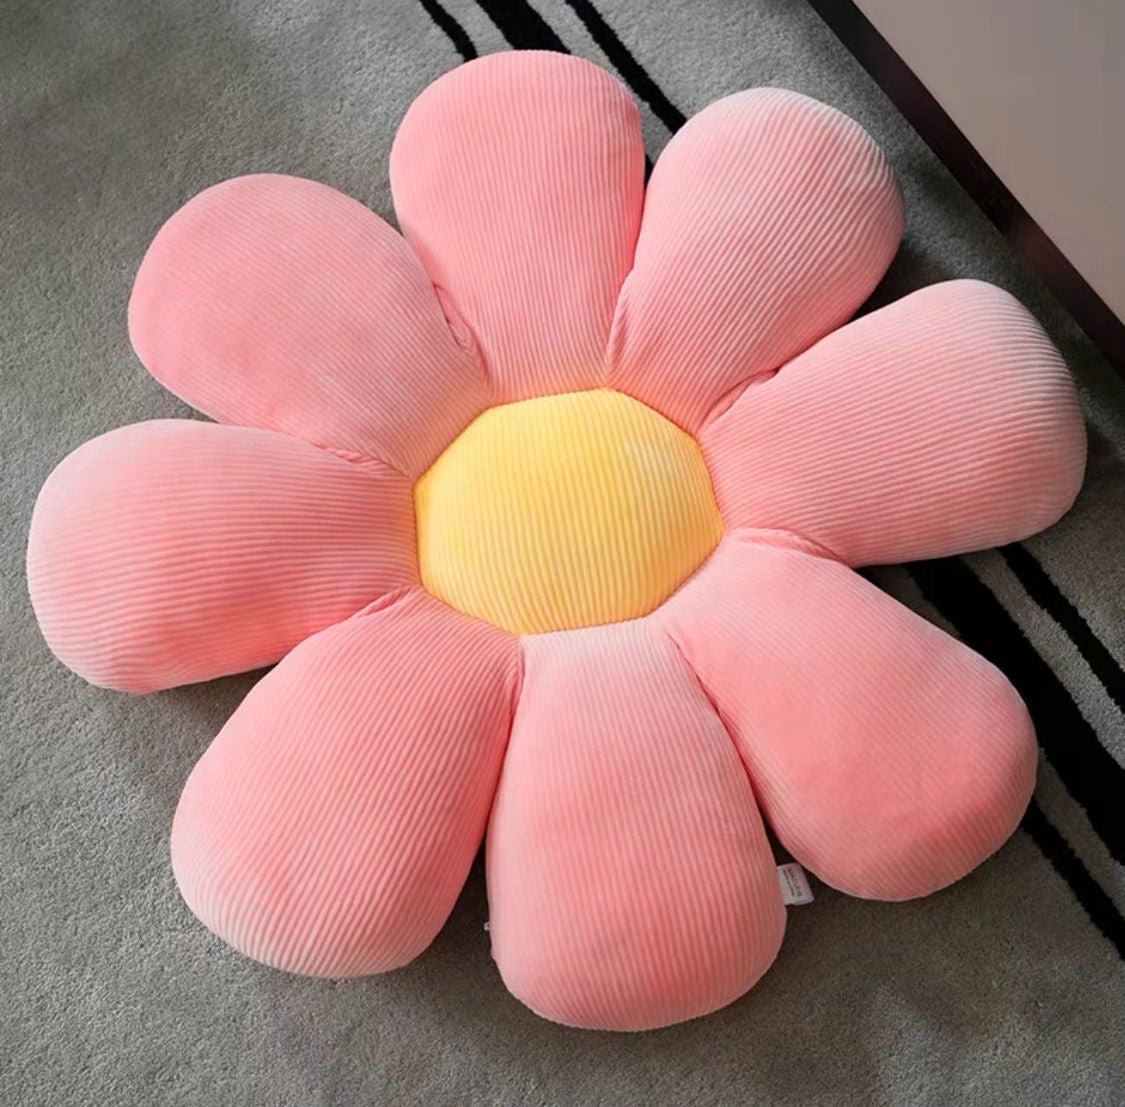 Add Decorative Flair to Your Home with Our Soft and Comfortable Flower Floor Pillows - Perfect for Any Room!